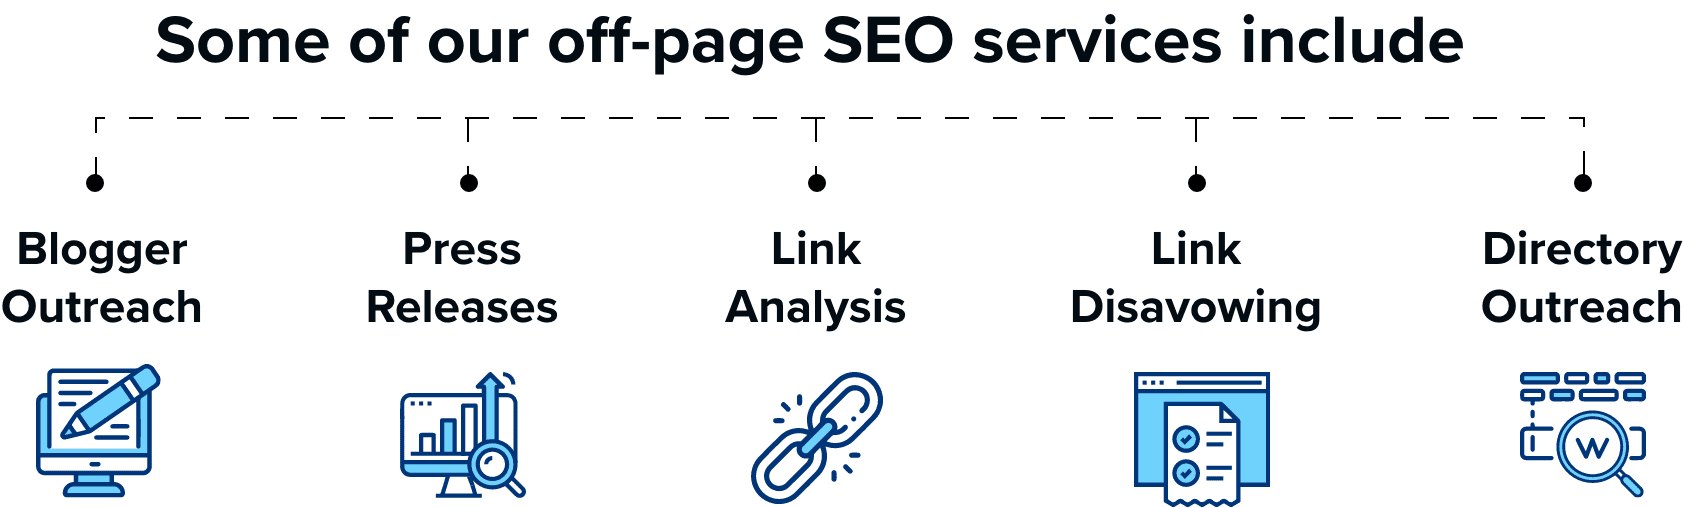 Off-Page SEO: what is it & what are it's types